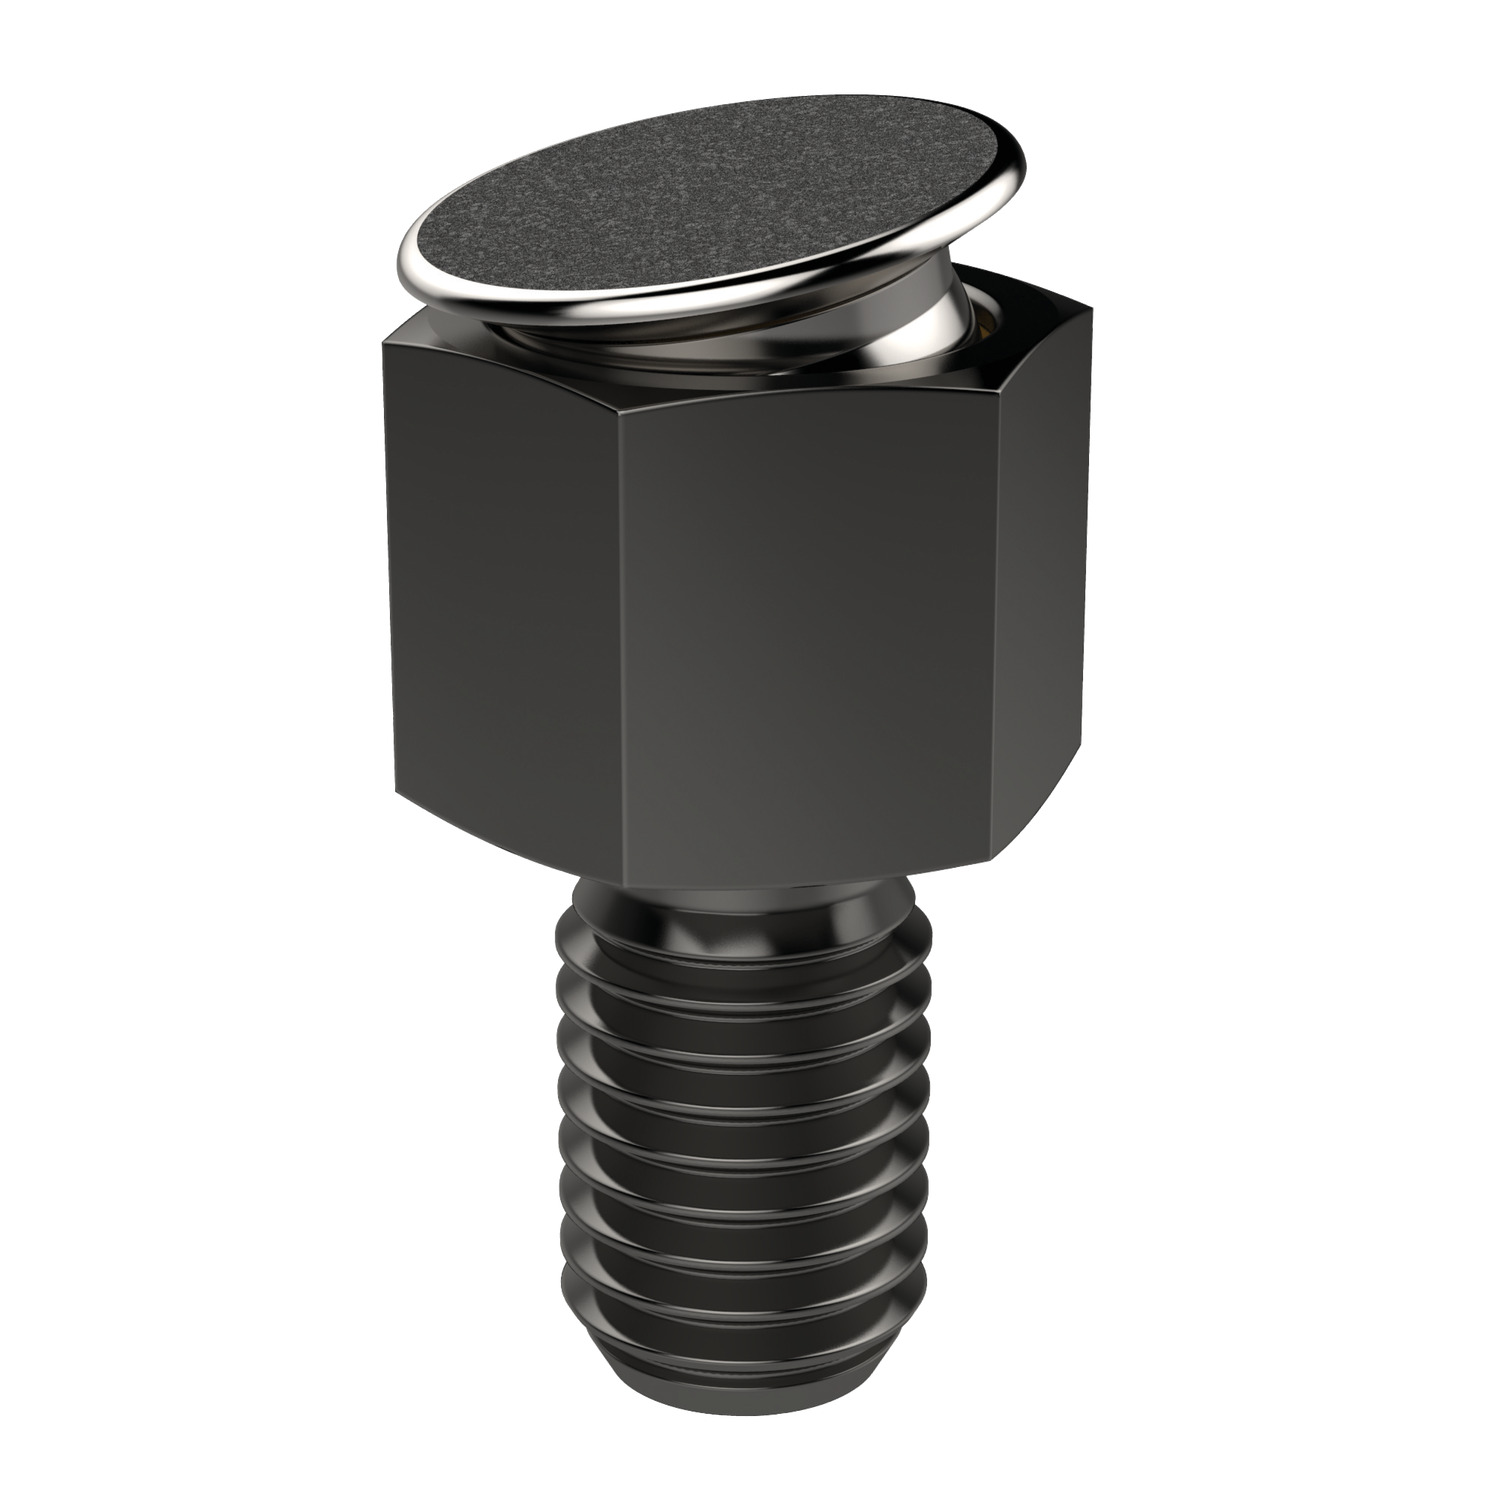 Grippers - Self Aligning Self-aligning diamond coated grippers with threaded bolt for fixturing. Ideal for use in holding smooth and slipper components whilst minimising surface marks.